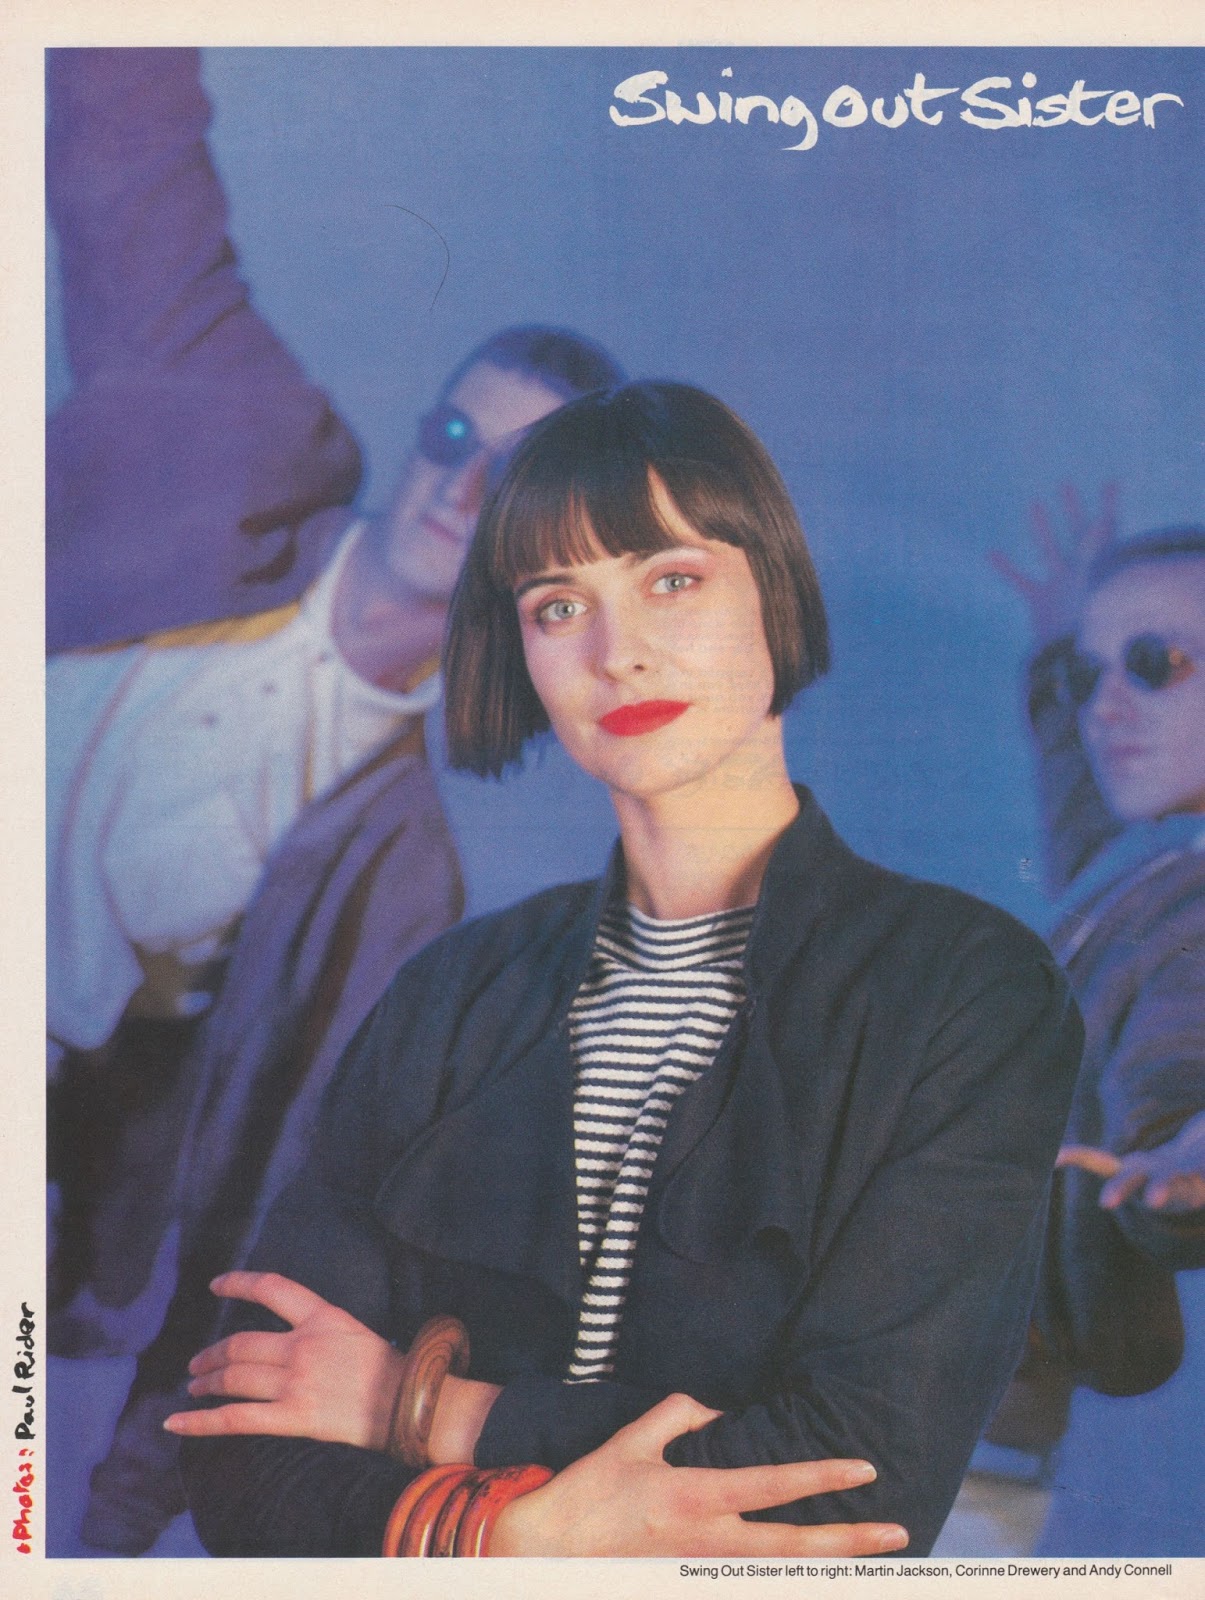 Top Of The Pop Culture 80s: Swing Out Sister Smash Hits 1986